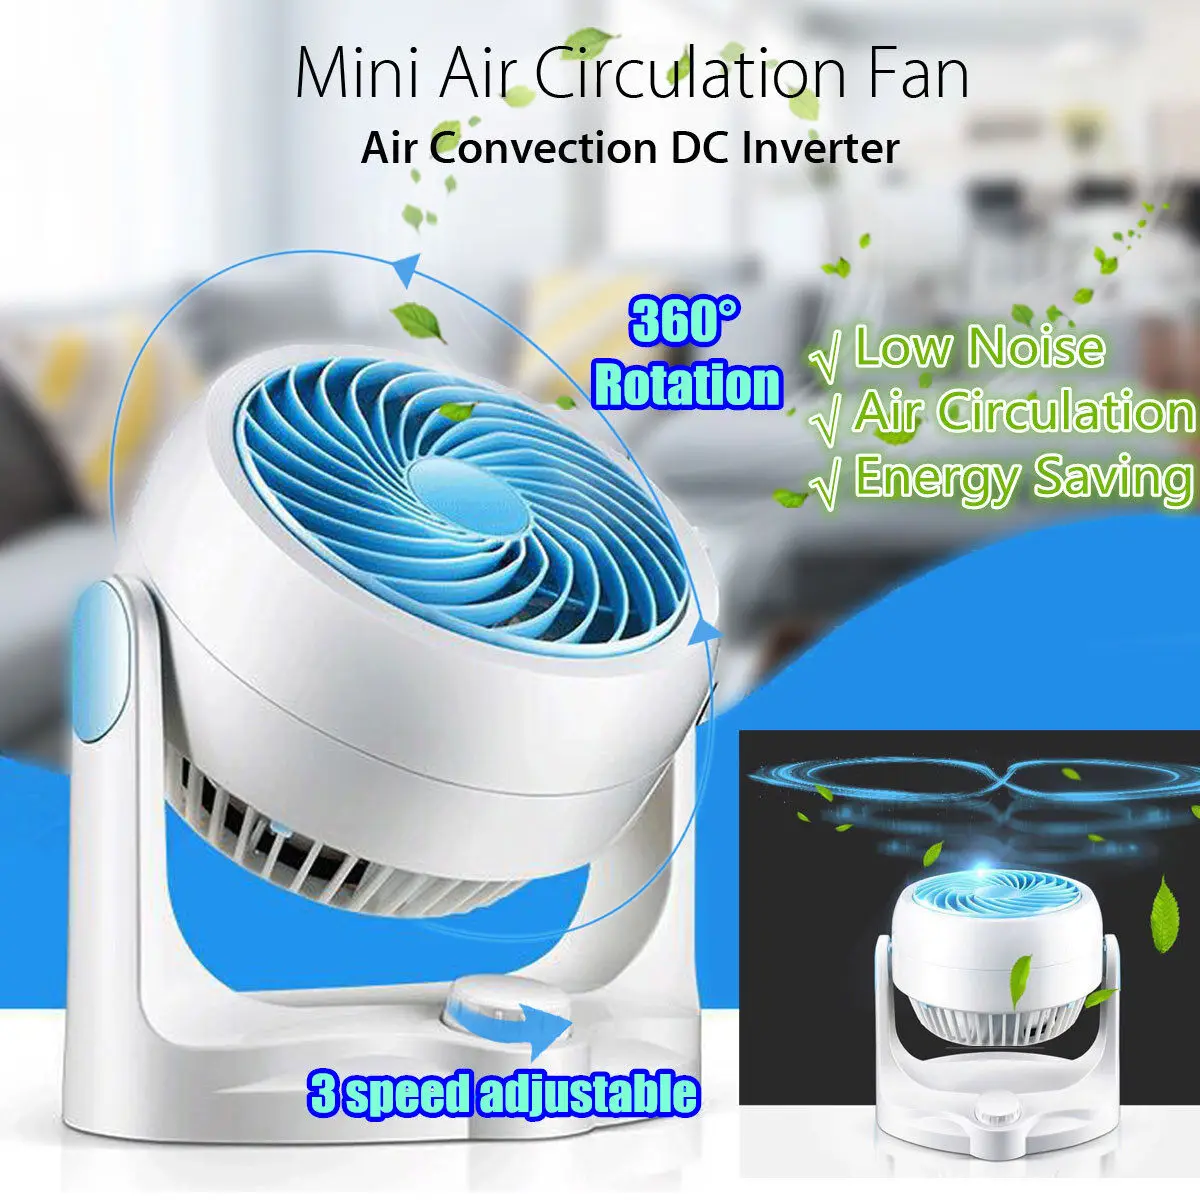 

New 3 Speed Air Circulation Desktop Mini Electric Fan Air Convection Air Circulator Turbo Low Noise Cooler Fan for Office Home